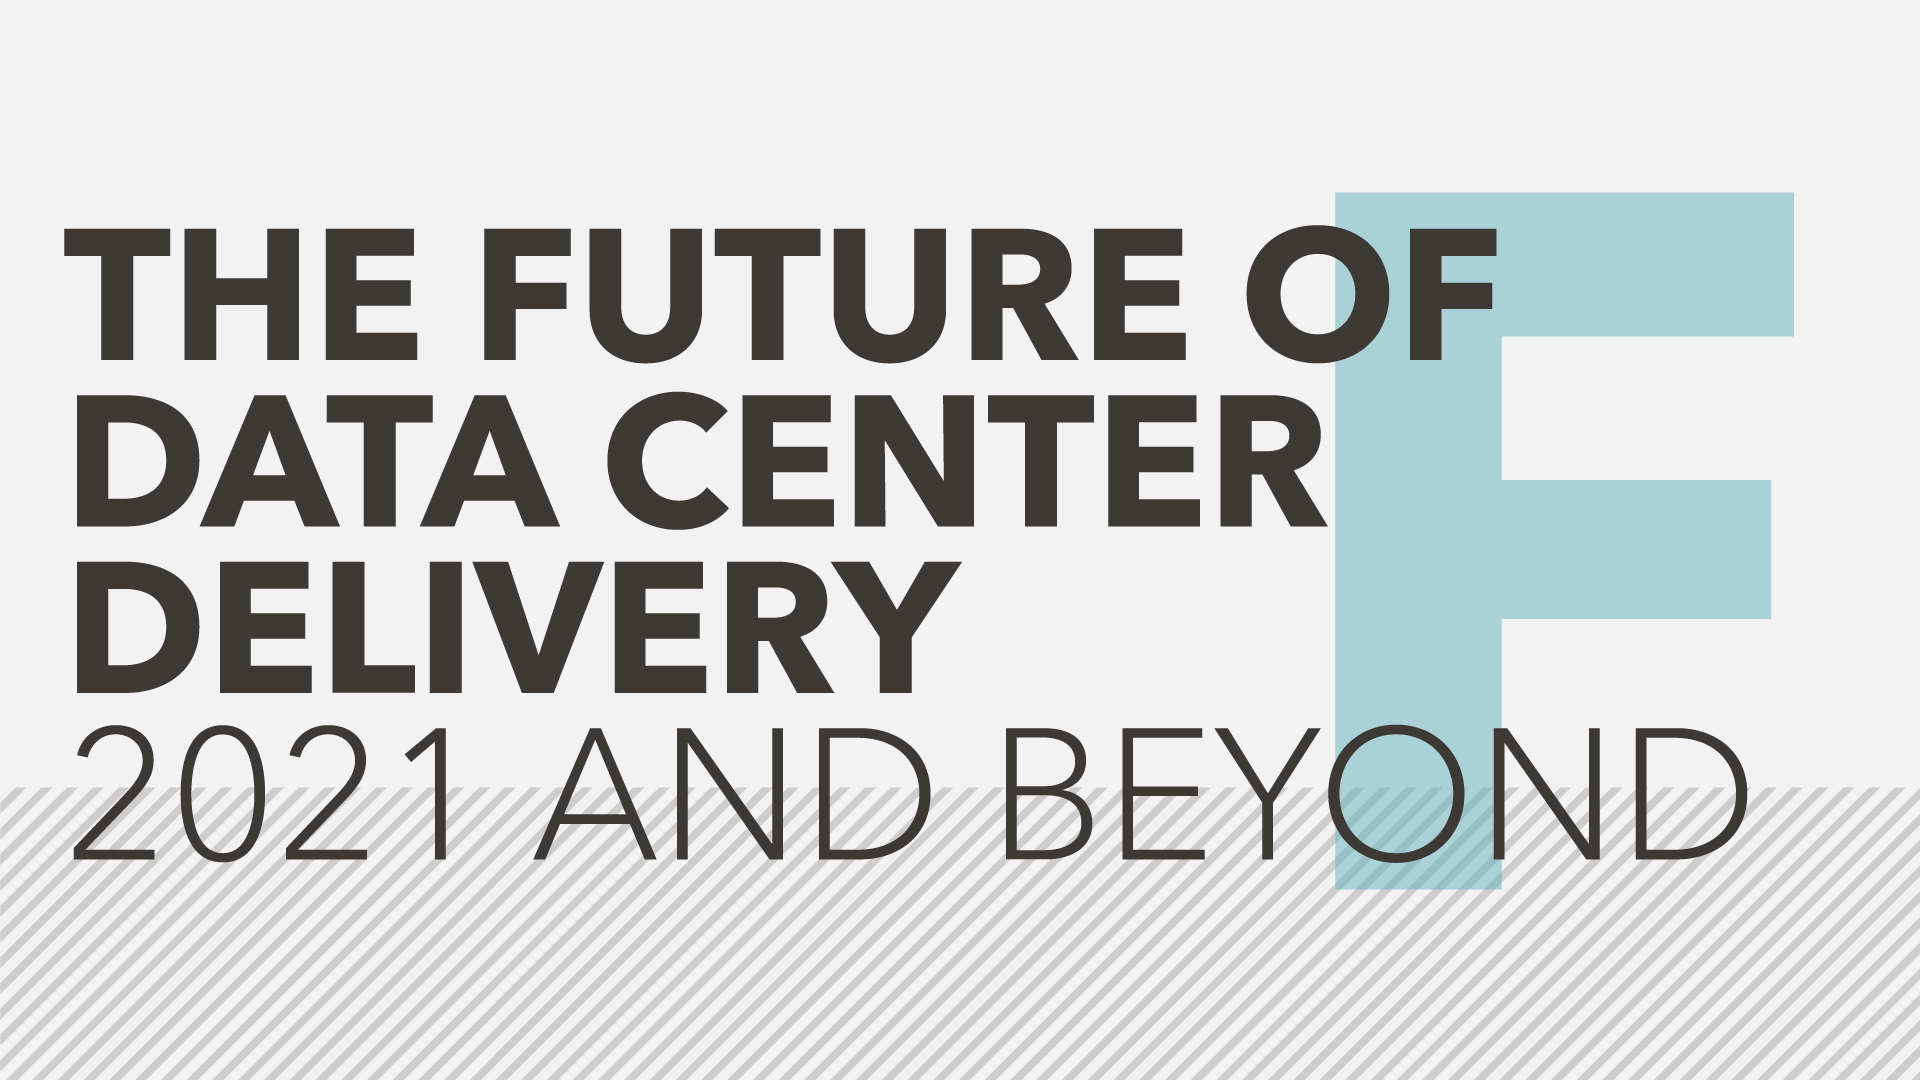 The future of data center delivery – 2021 and beyond